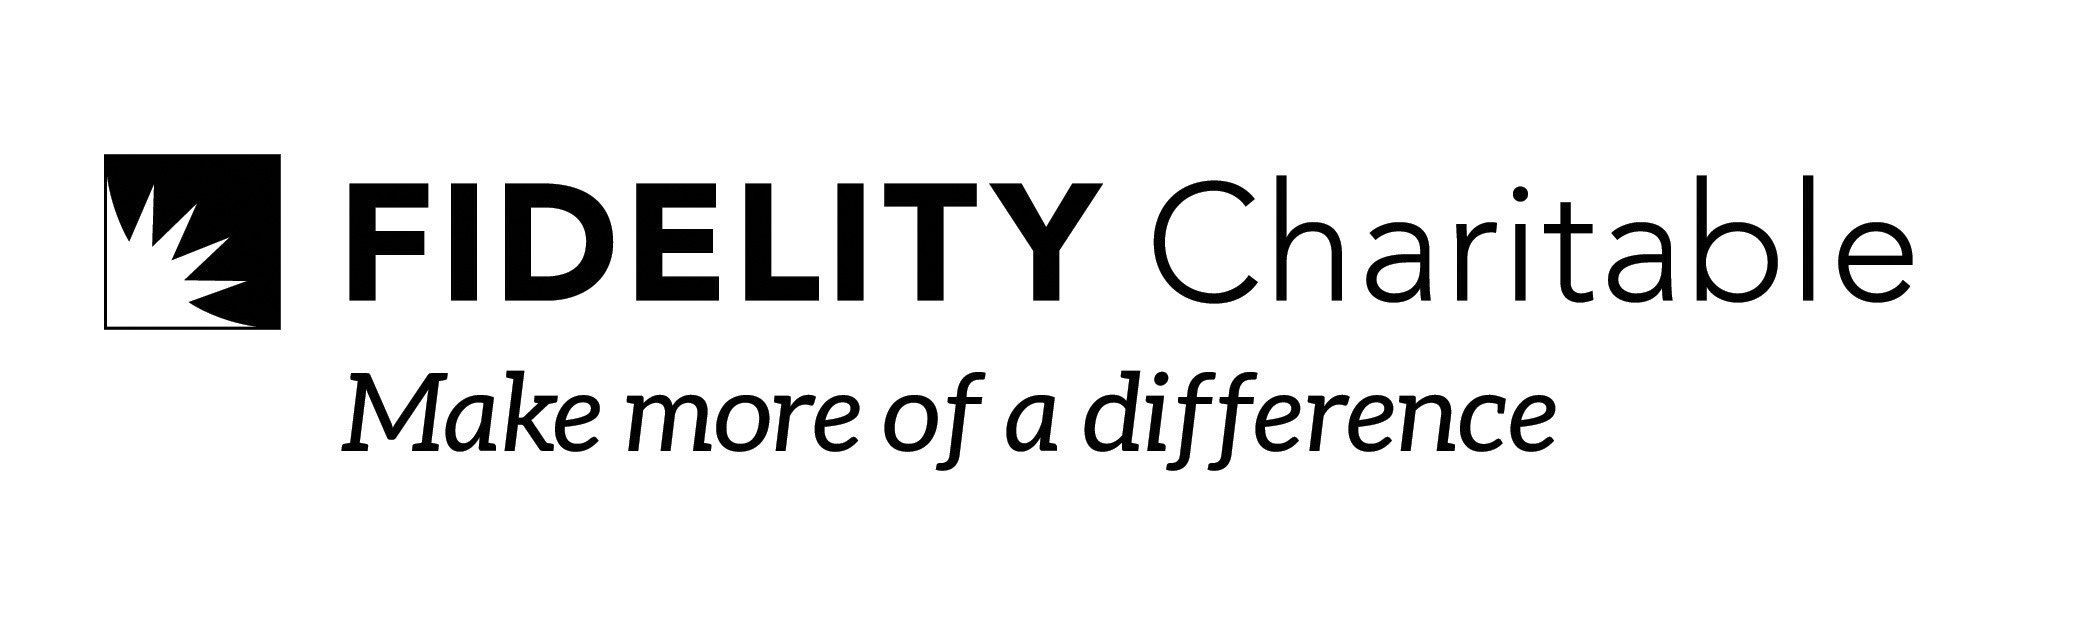  FIDELITY CHARITABLE MAKE MORE OF A DIFFERENCE